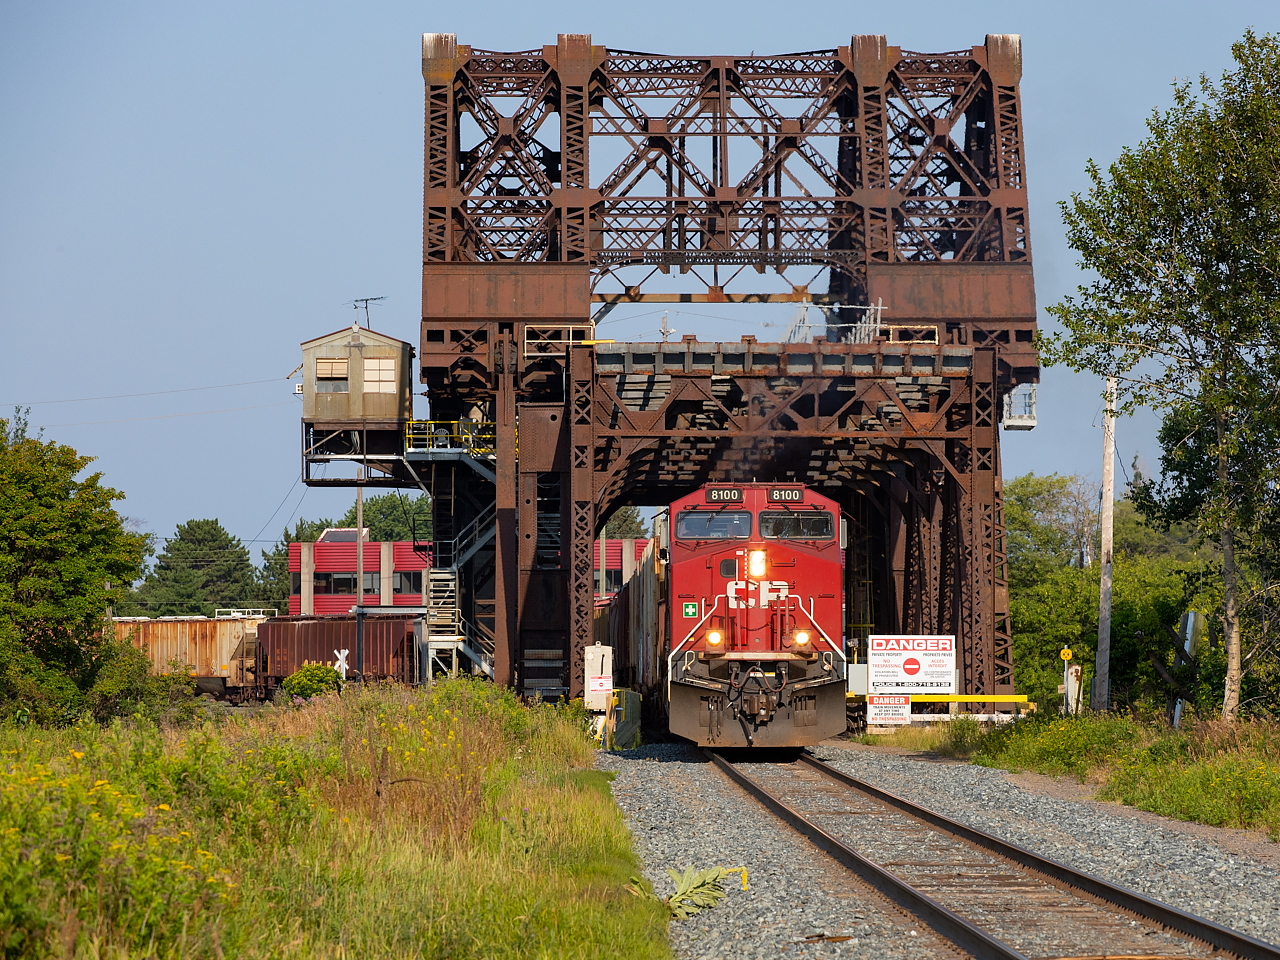 CP's 0630 yard job is pictured crossing the Jackknife Bridge in Thunder Bay with the 8100 solo and 85 loads of potash from Mosaic on the drawbar. The potash had come in previously on a 620 which was joint unit potash and grain. The 85 loads are destined for Thunder Bay Terminals Ltd, which was a busy place in my week in town, handling quite a bit of potash as well as 100 loads of coke from CN. The bridge, which is a rather impressive structure, was completed in April 1913 and formerly had two functioning decks - one for rail (lower) and another for cars (upper), which was dismantled in 2004. For those curious to see, David Young previously offered this view of the other side of the bridge.